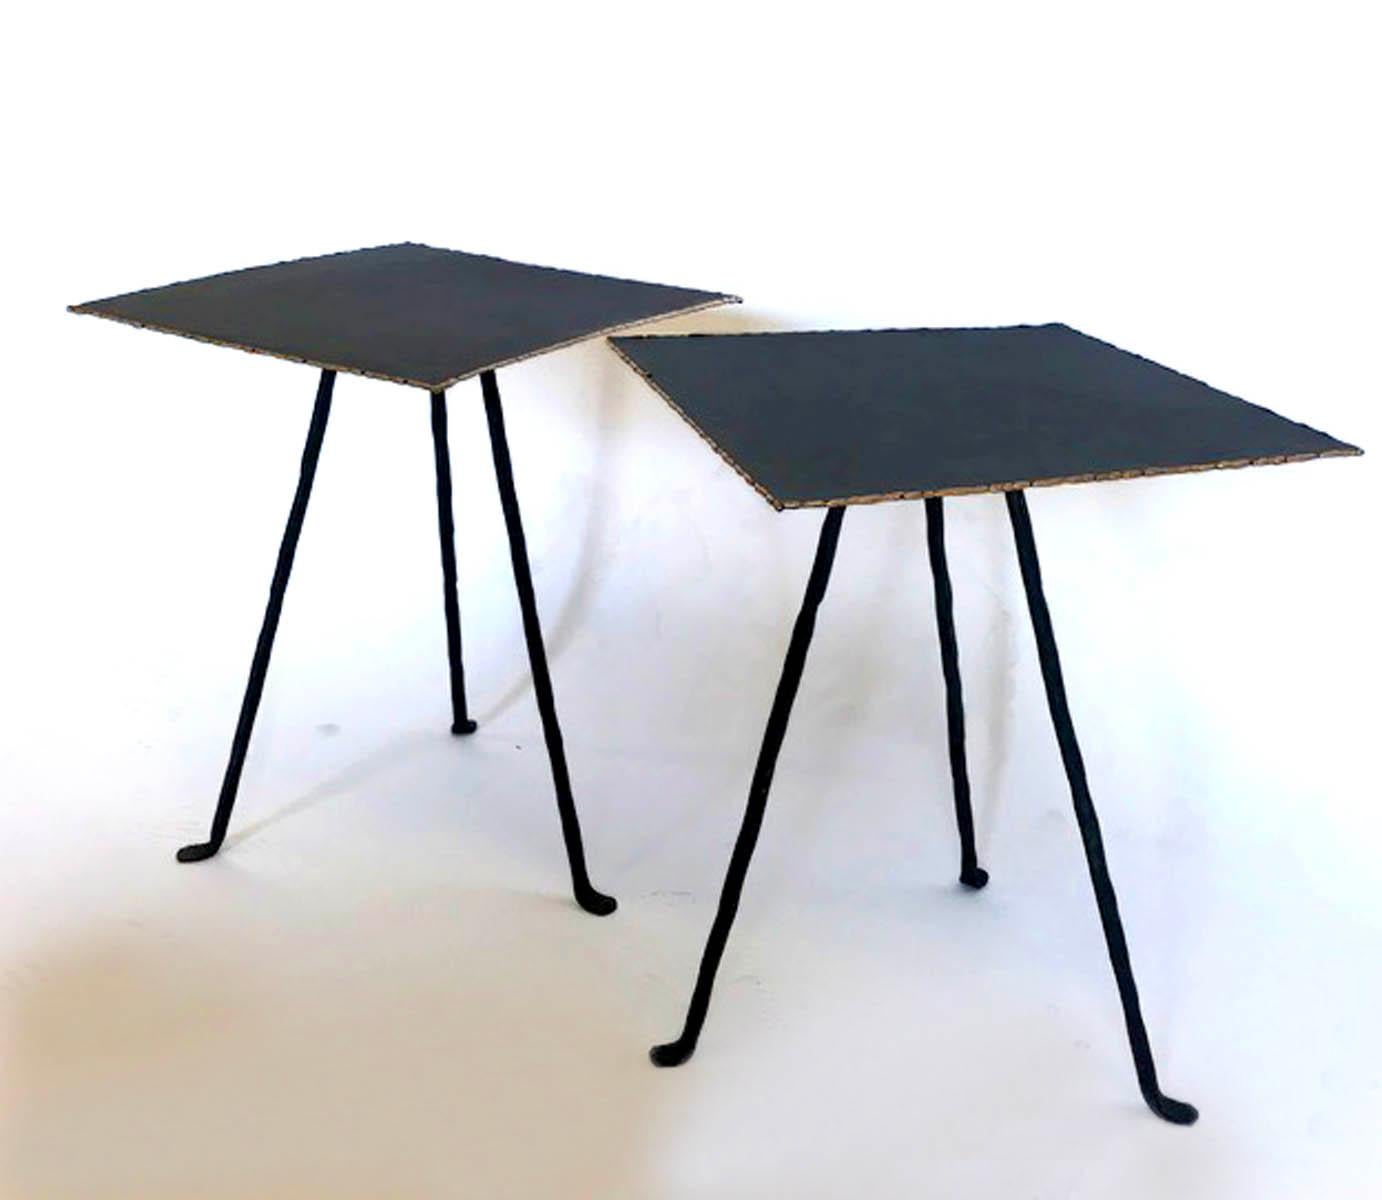 Square top tripod tables, priced and sold separately. Tops are made from iron with a patinated finish and edges are finished in bronze. Can also be made in custom sizes, with round, square or rectangular tops.
Made in Los Angeles by Dos Gallos